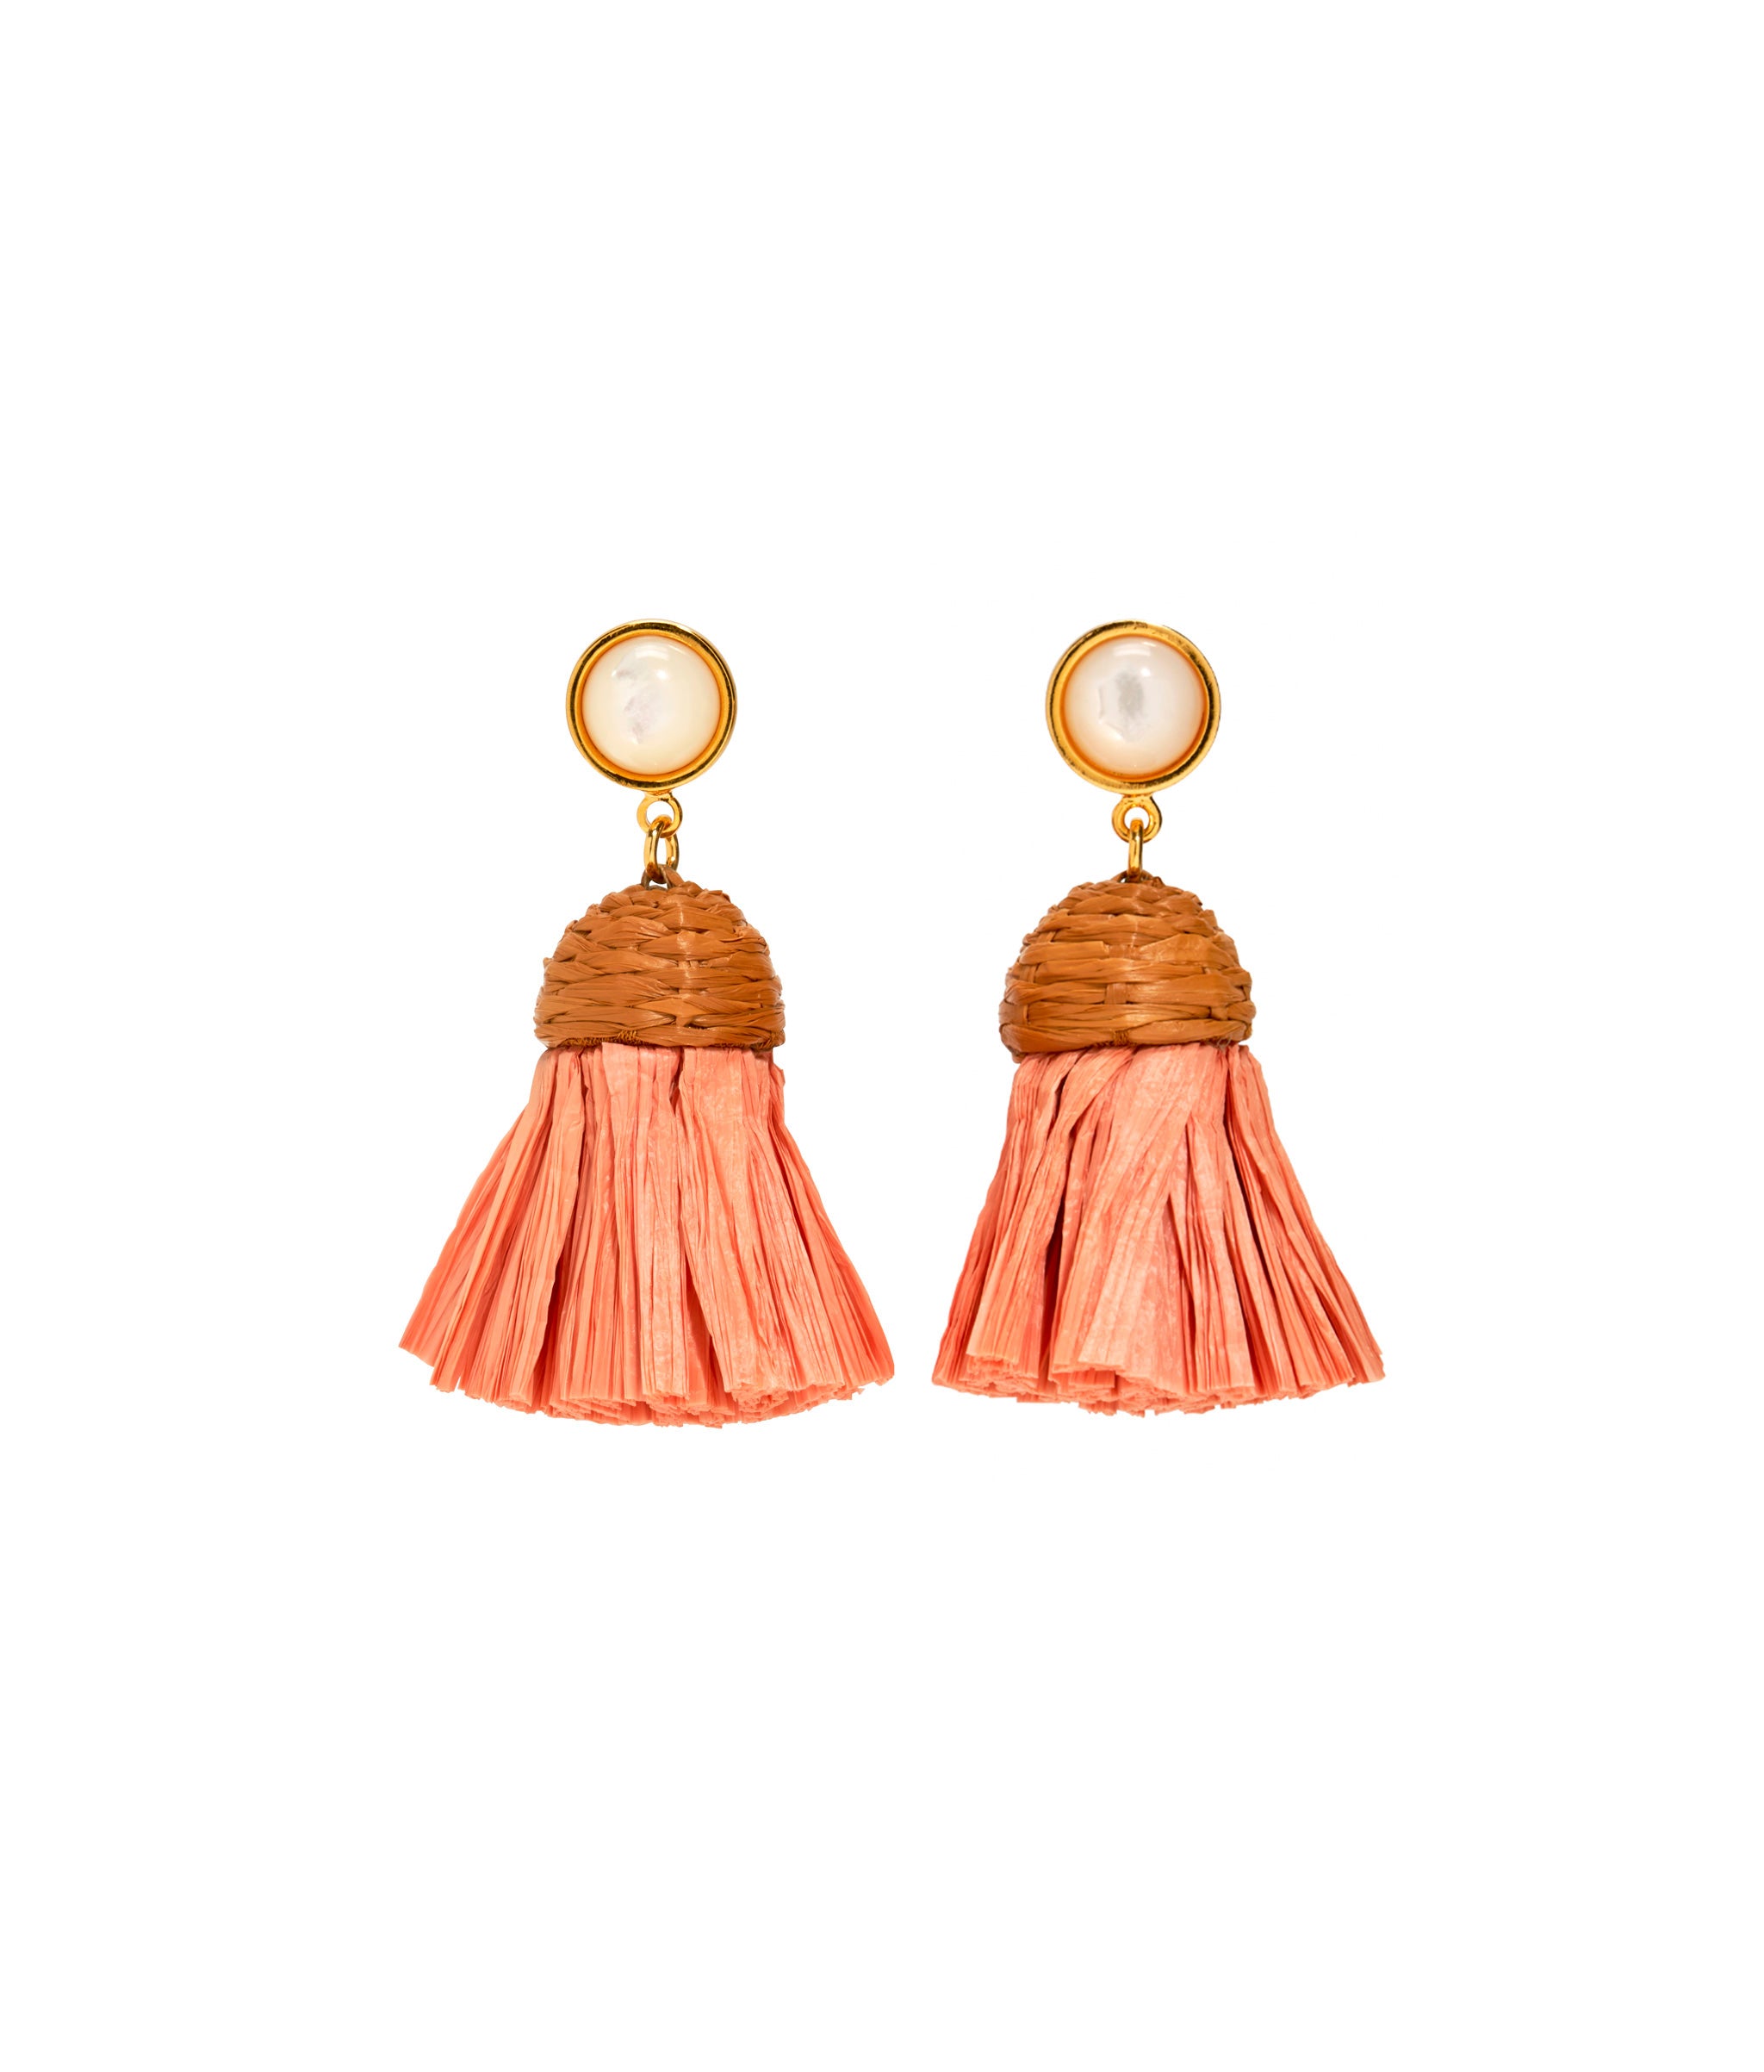 Raffia Earrings in Rose. Gold-plated earrings with mother-of-pearl tops and rose-colored raffia fringe.